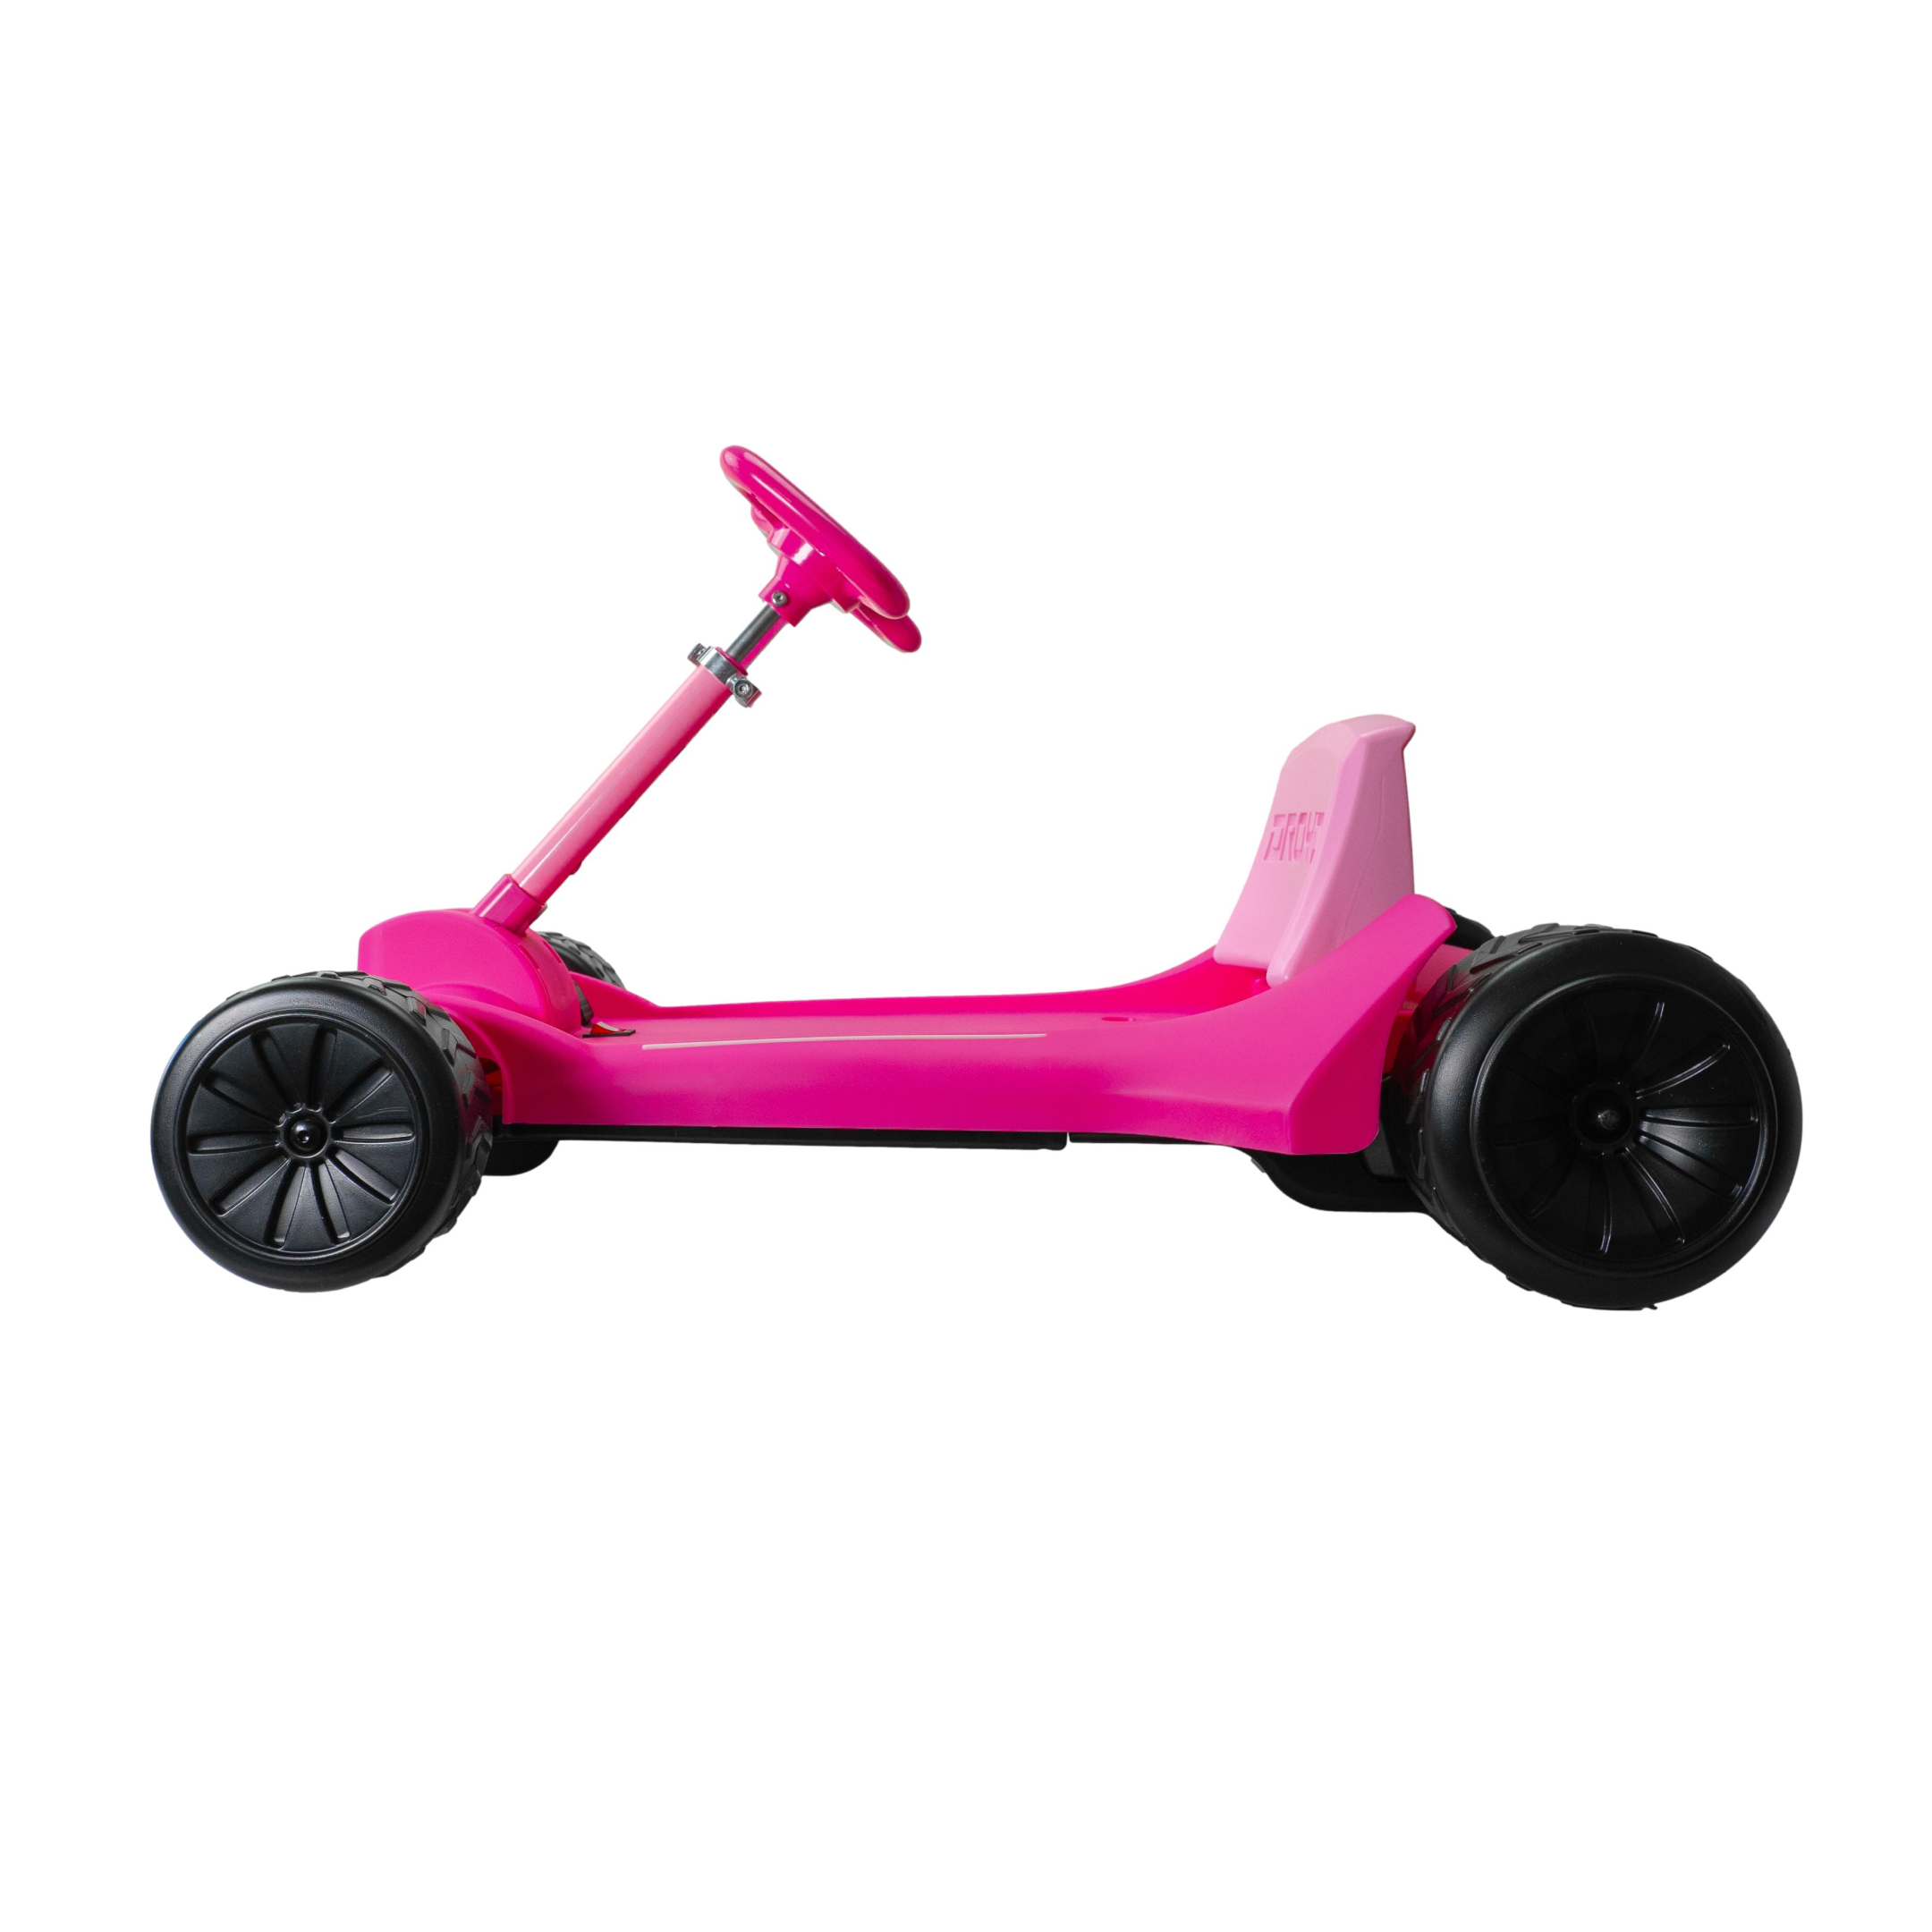 Zypster pink product side view